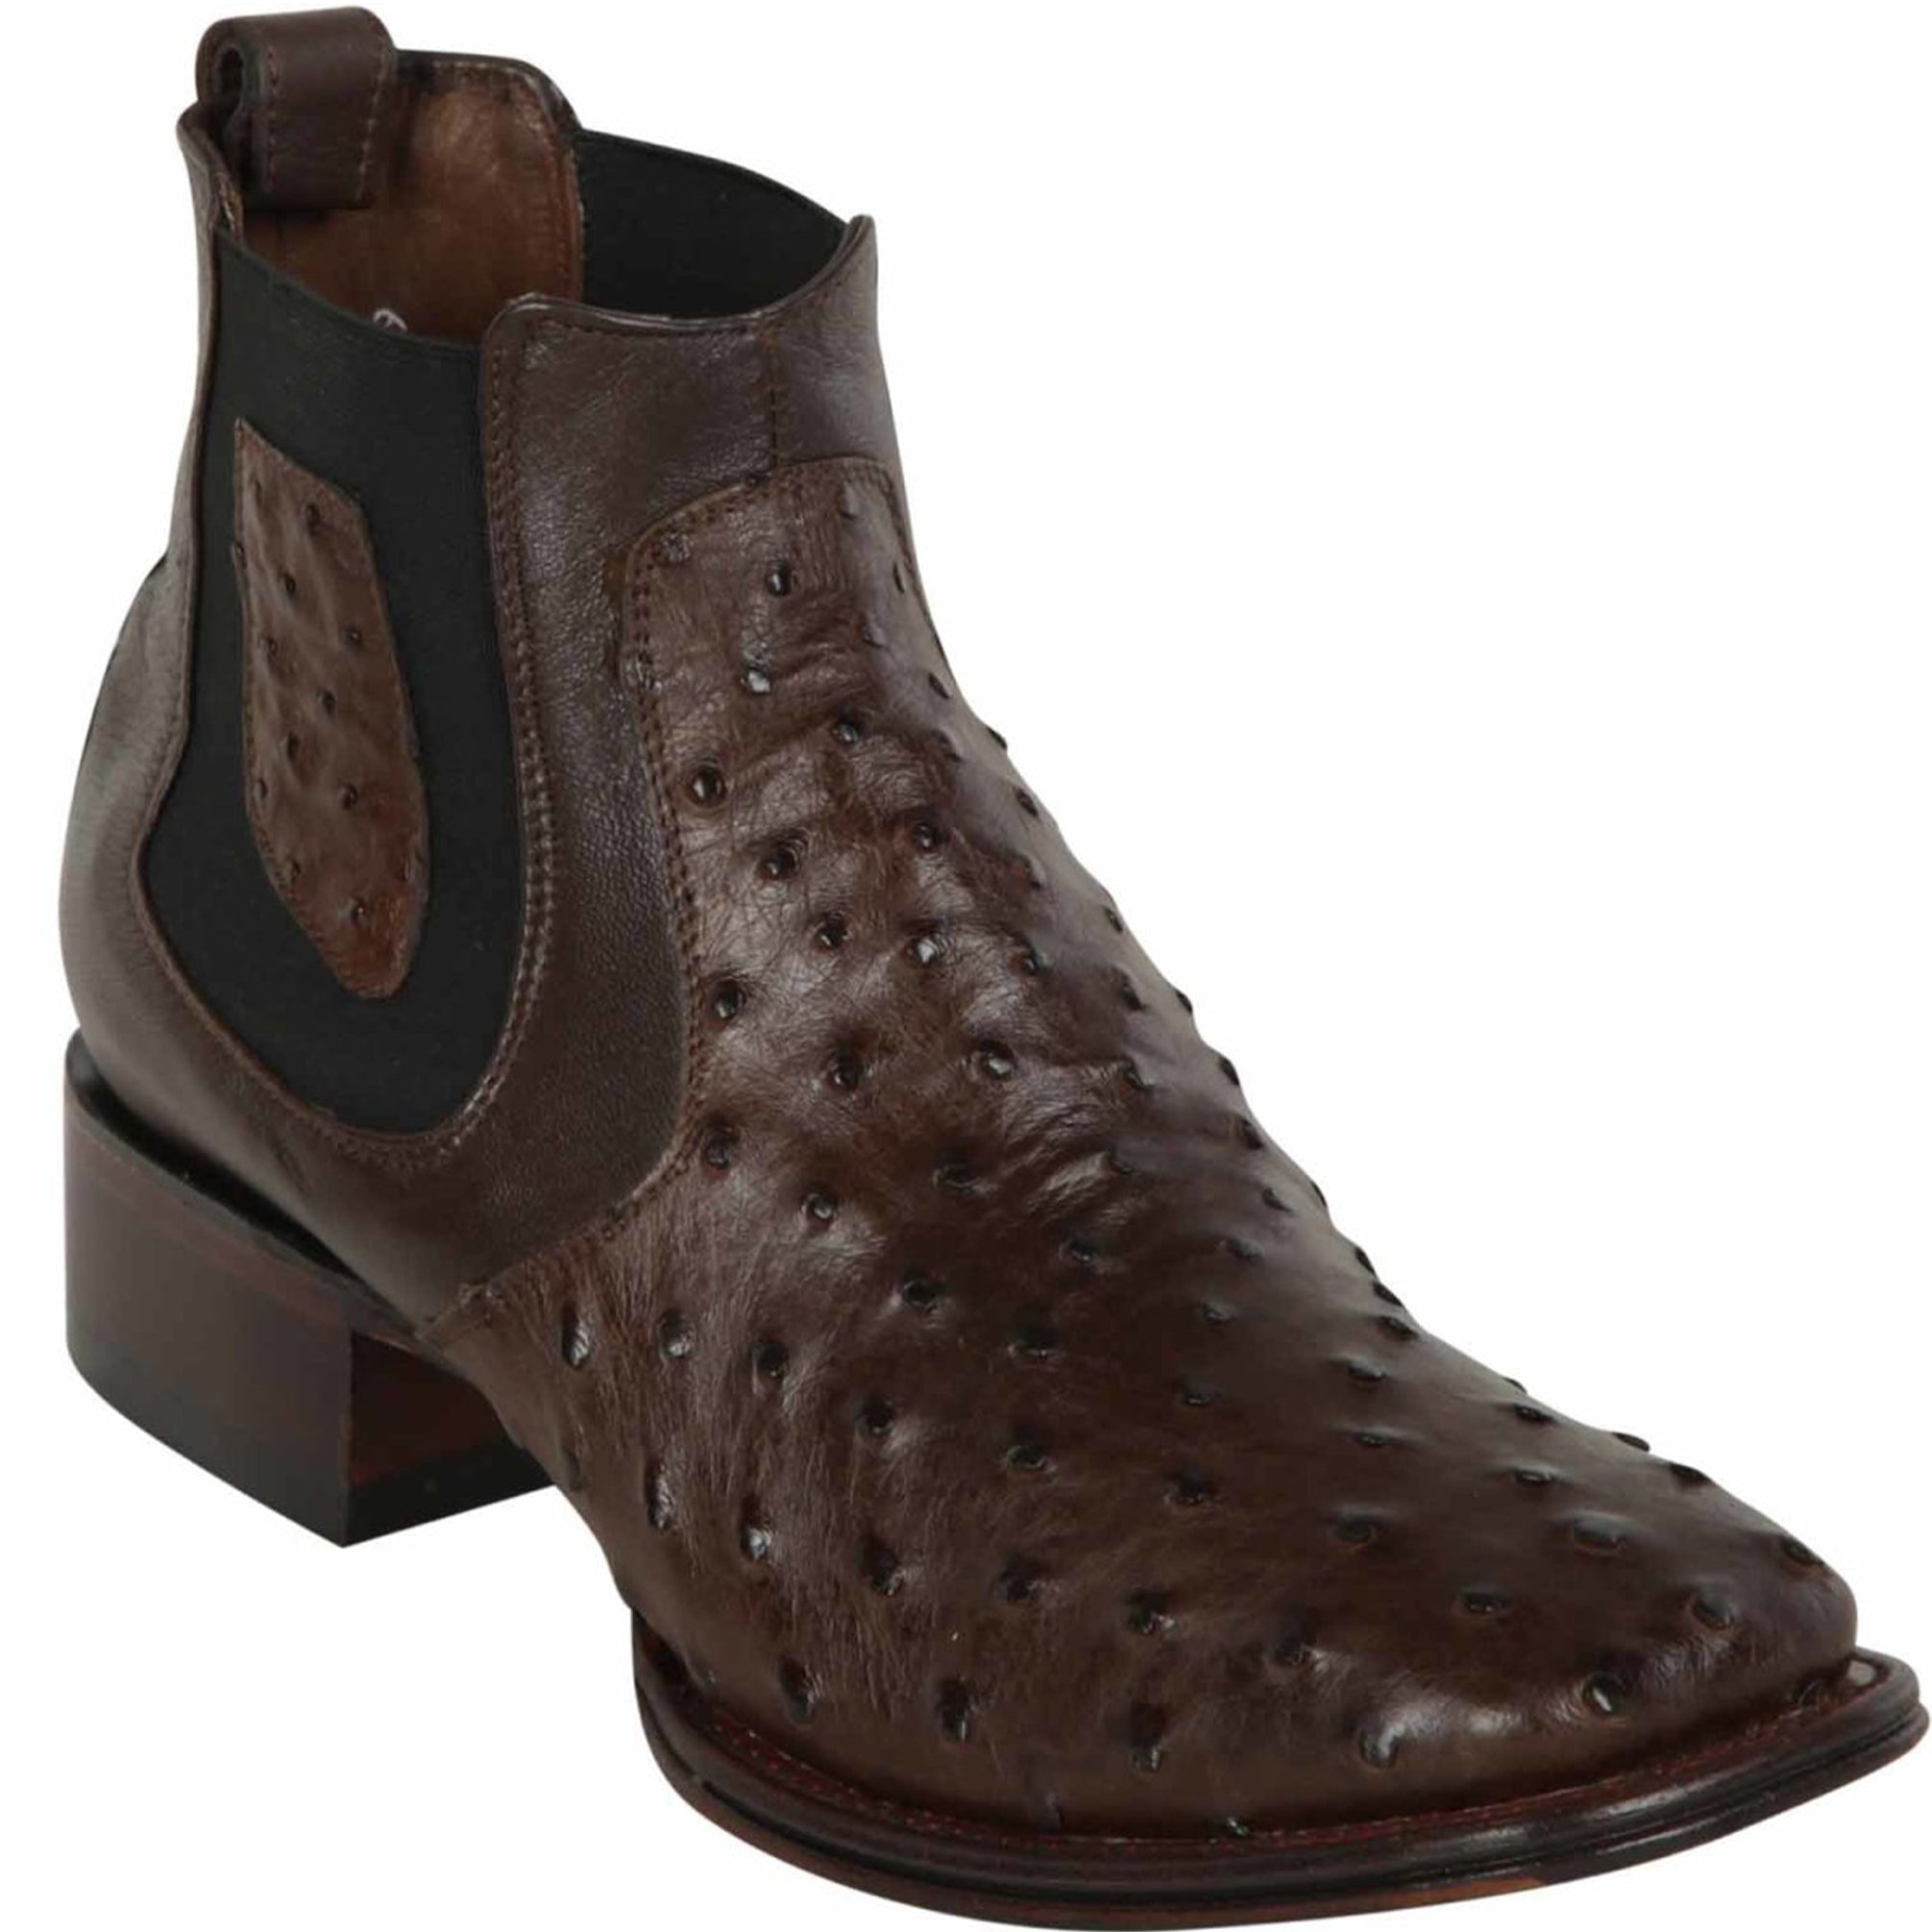 Mens Short Brown Ostrich Leather Boots Square Toe - Los Altos Boots